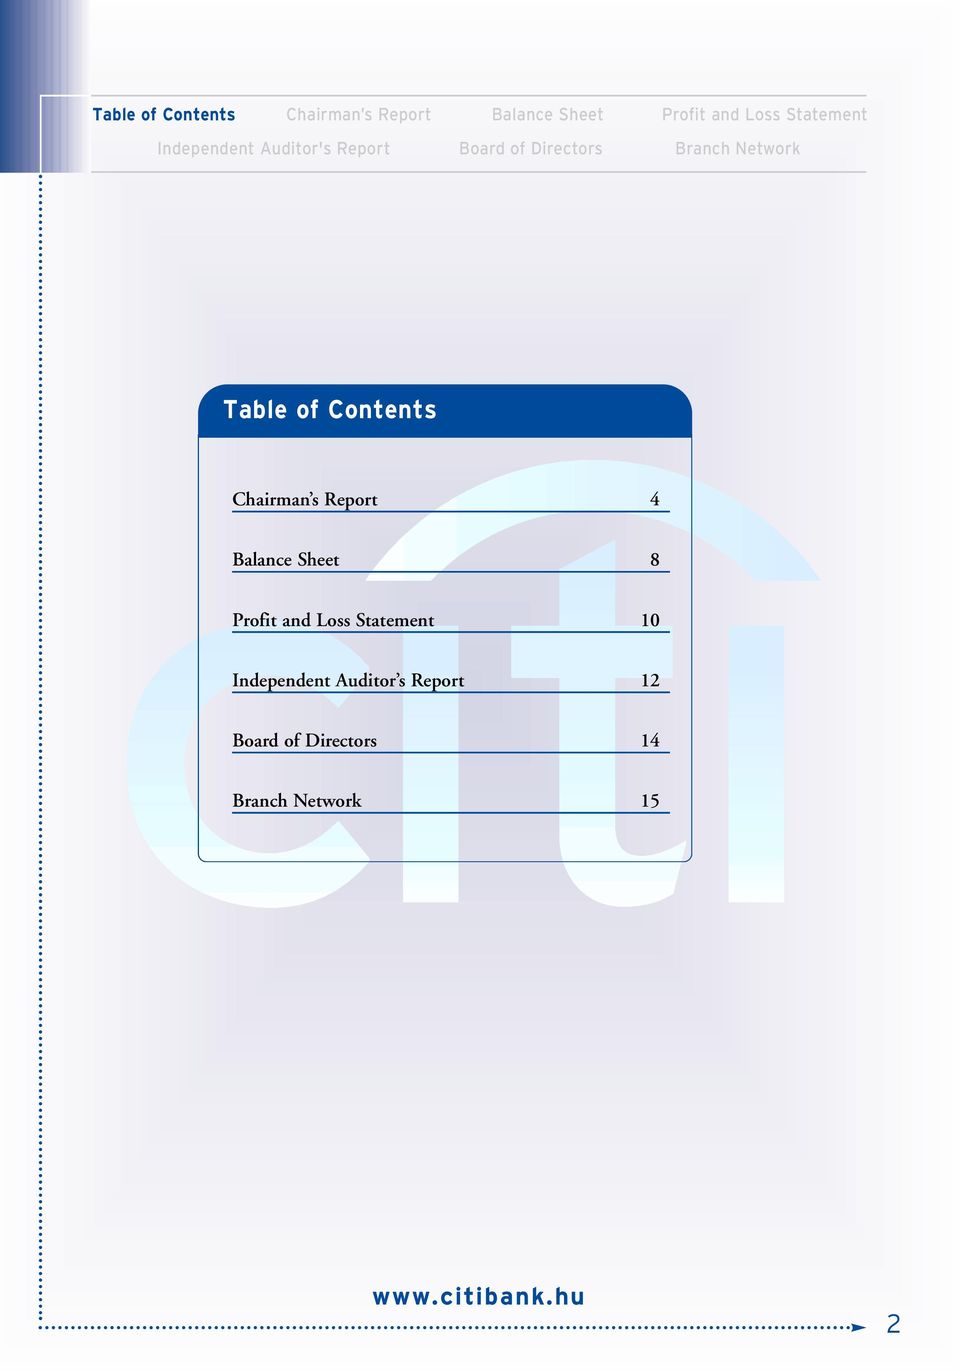 Table of Contents Chairman s Report 4 Balance Sheet 8 Profit and Loss